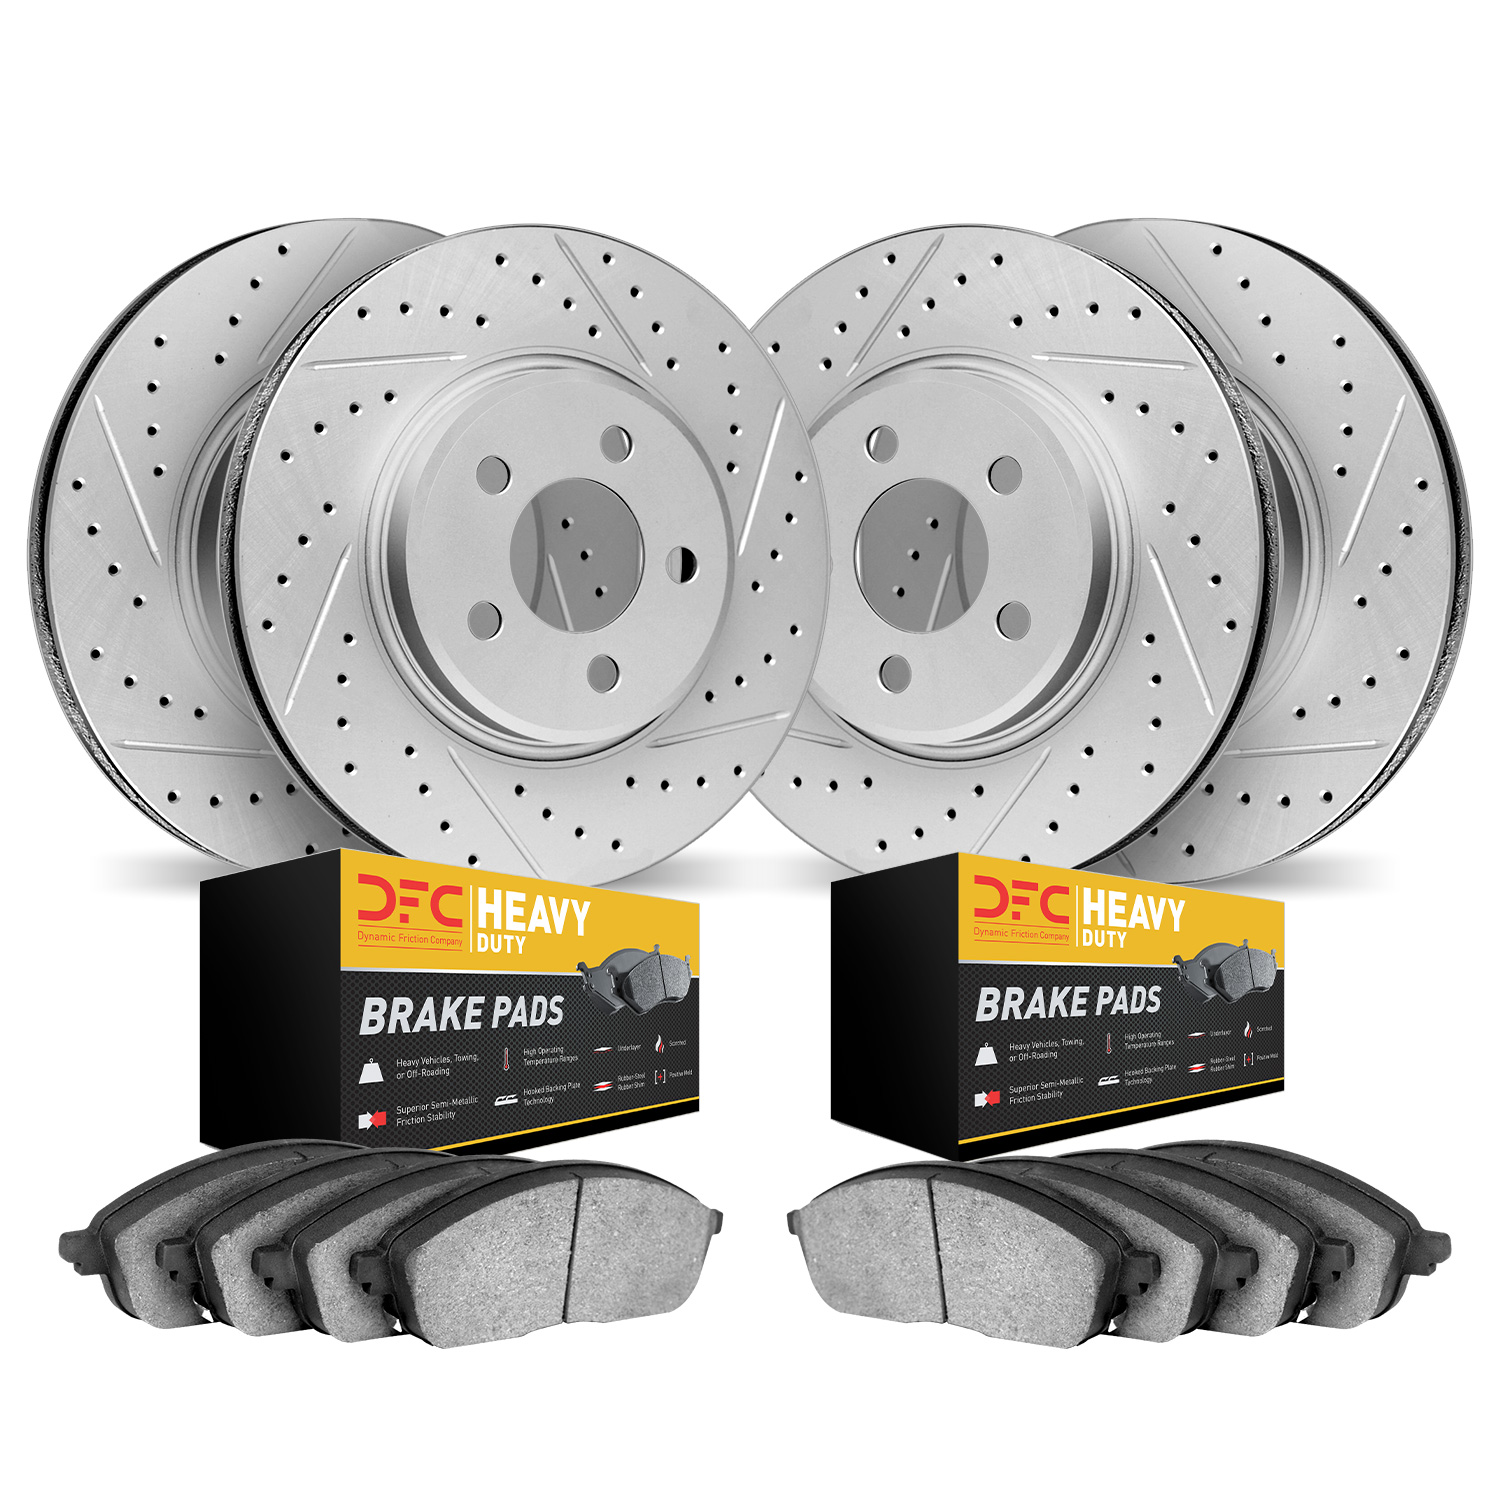 2204-40061 Geoperformance Drilled/Slotted Rotors w/Heavy-Duty Pads Kit, 2006-2018 Mopar, Position: Front and Rear